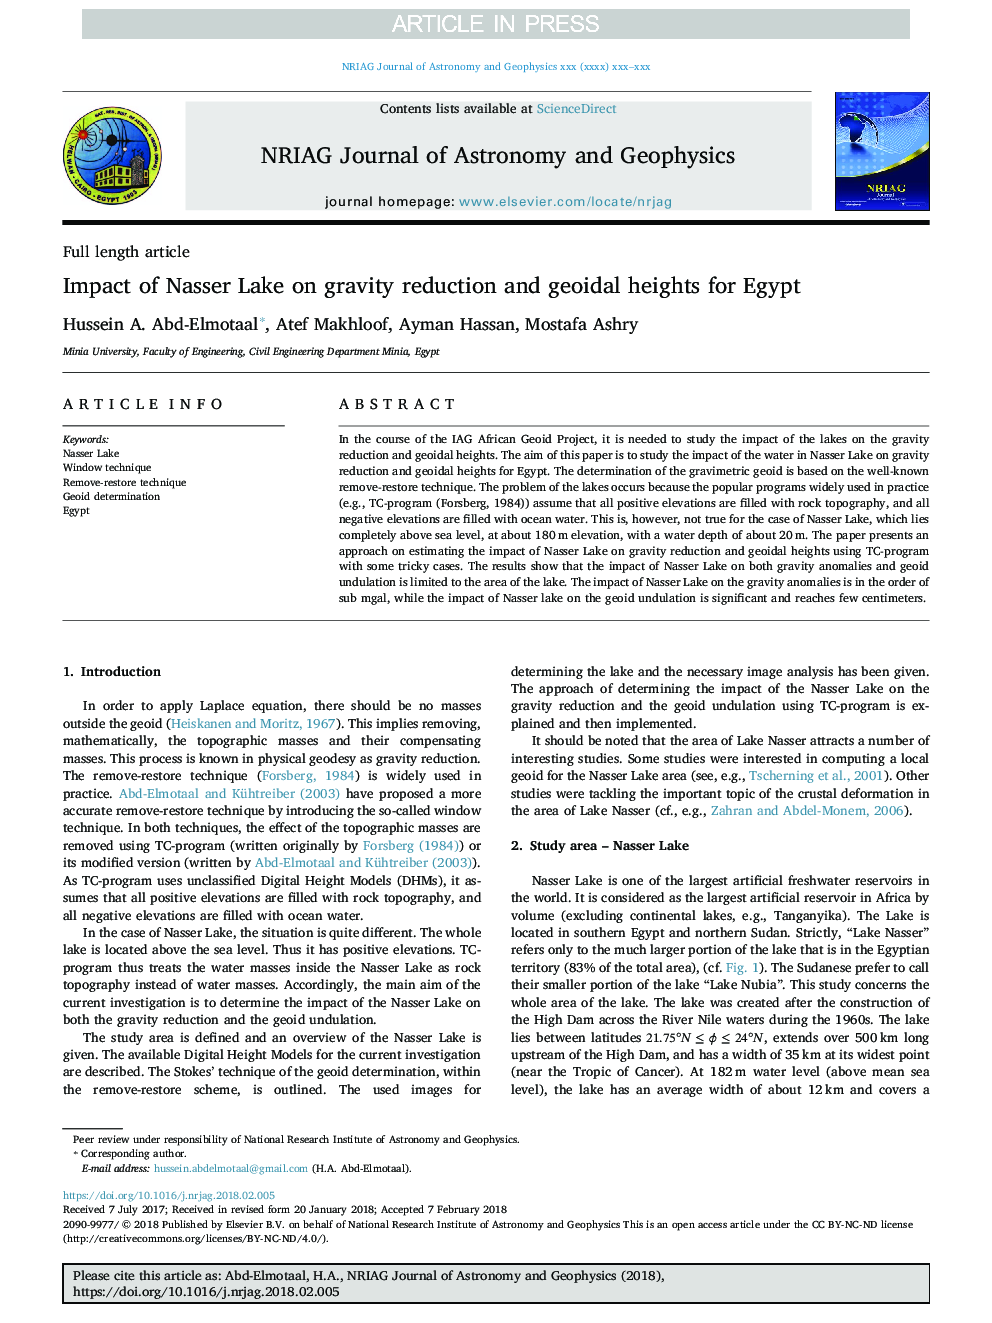 Impact of Nasser Lake on gravity reduction and geoidal heights for Egypt